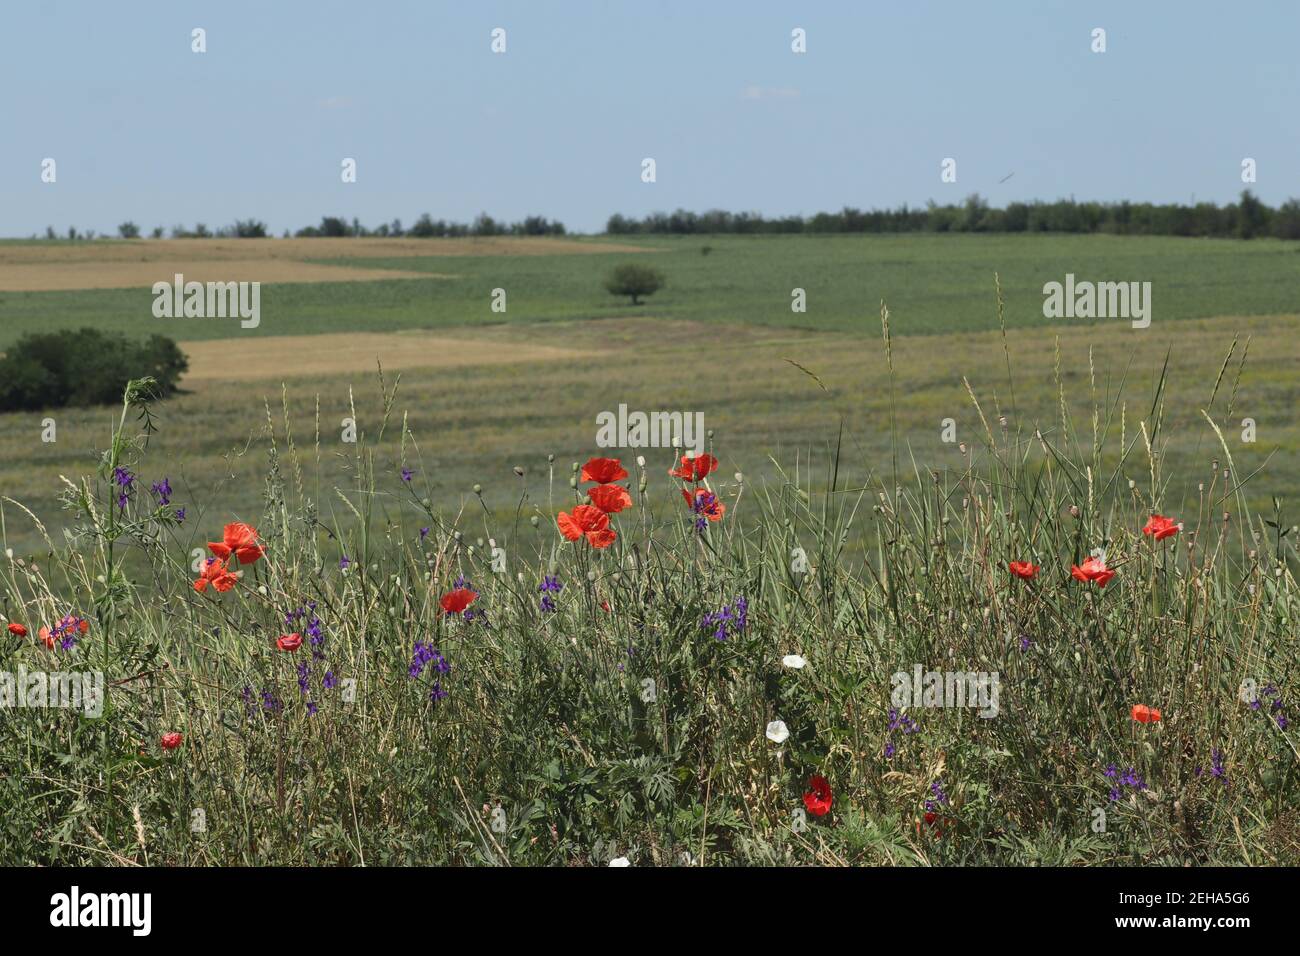 overgrown well-groomed lavender field on a sunny day and some red poppies Stock Photo